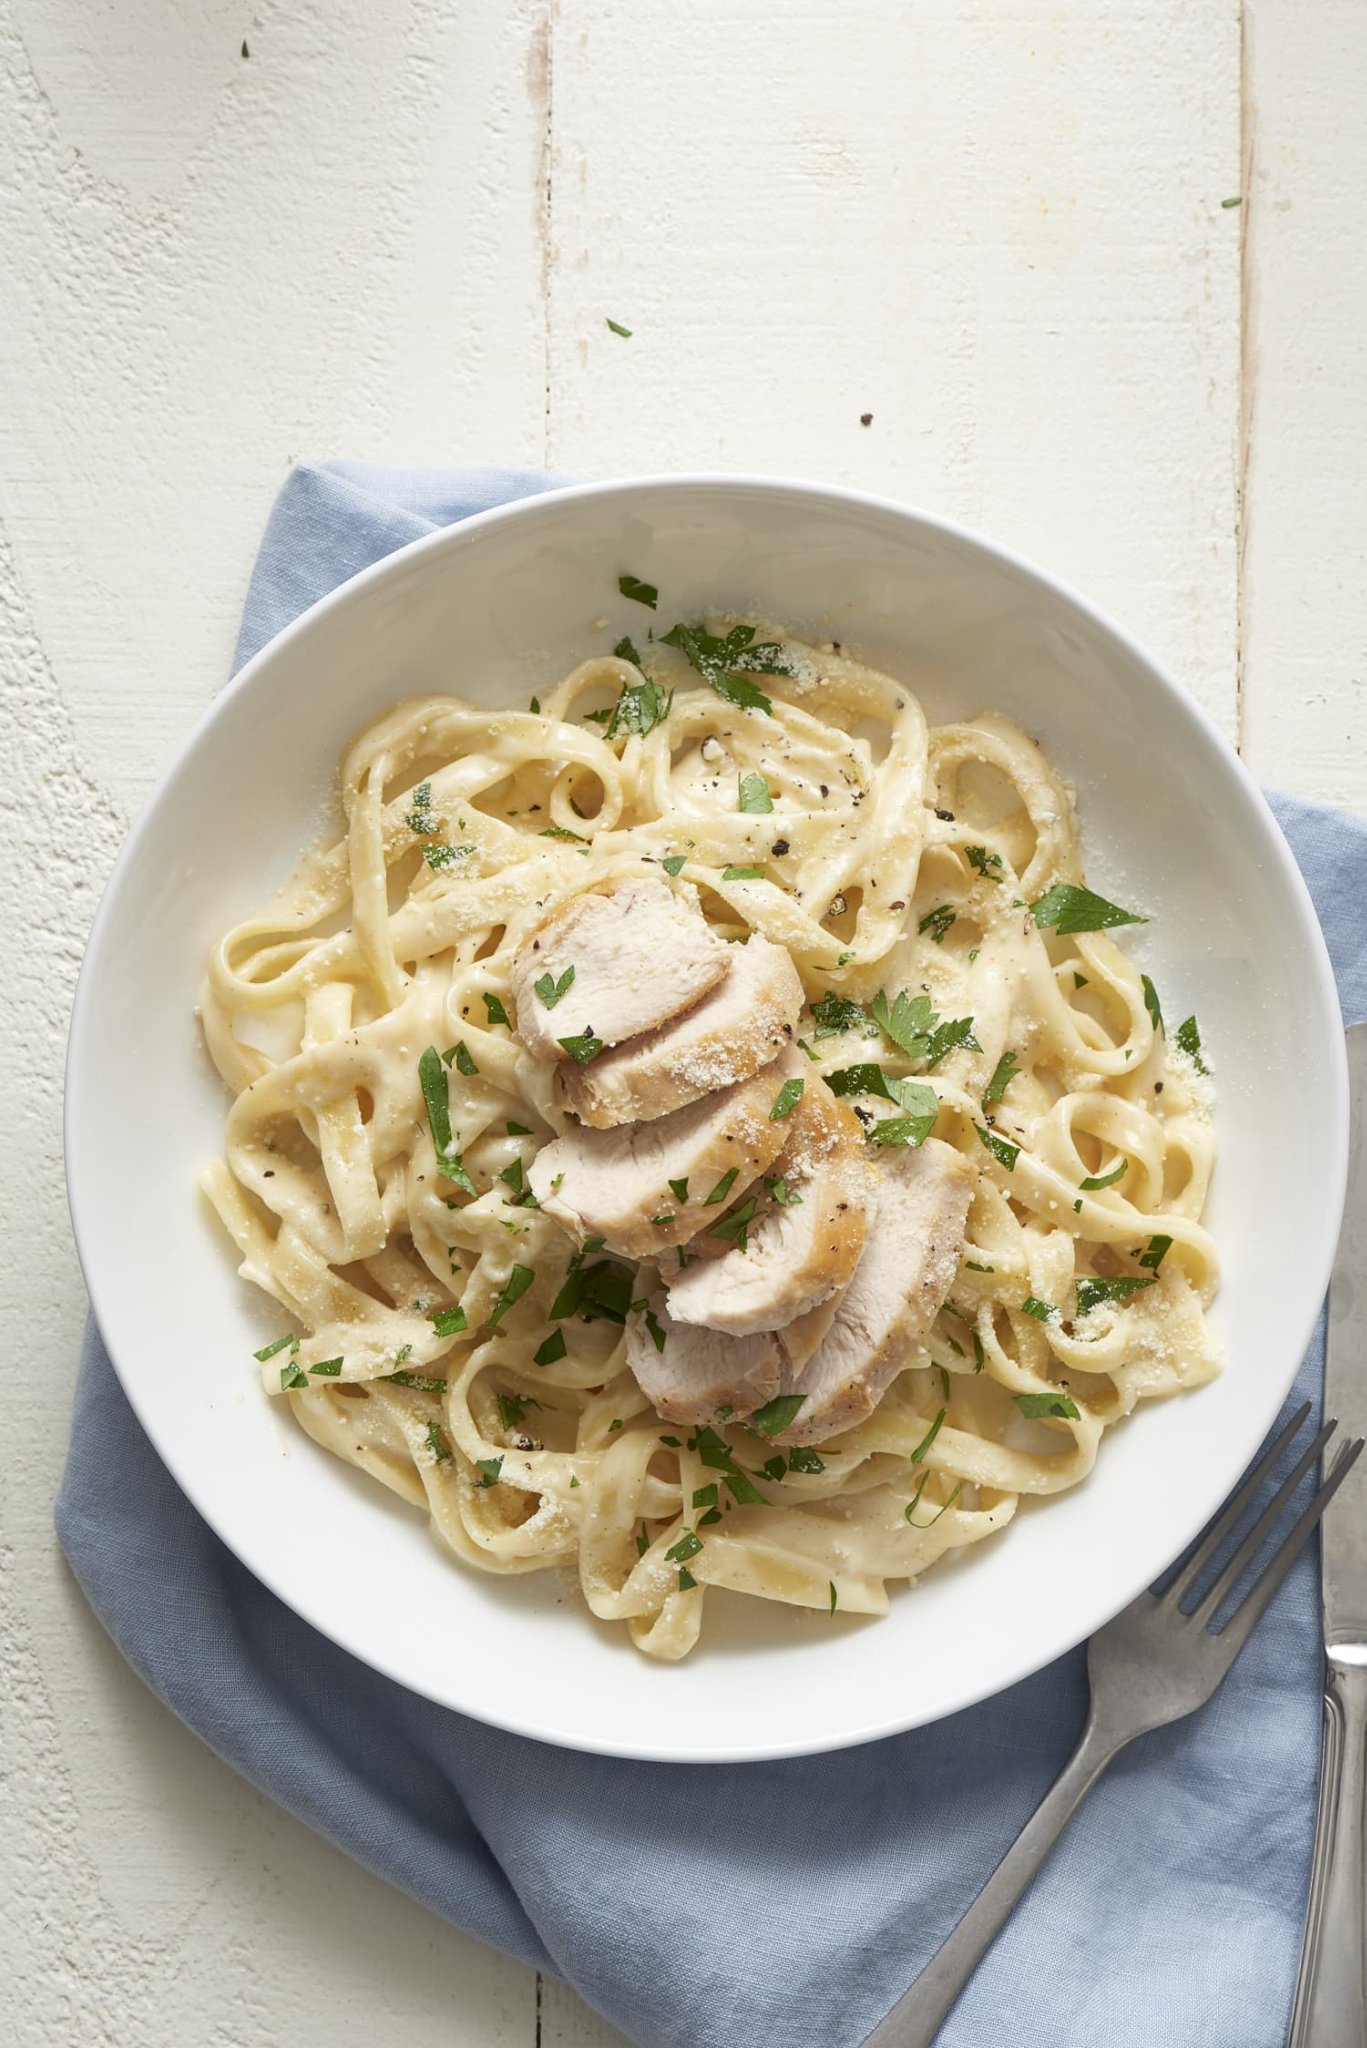 How To Make Classic Chicken Alfredo Pasta: The Easiest, Simplest Method